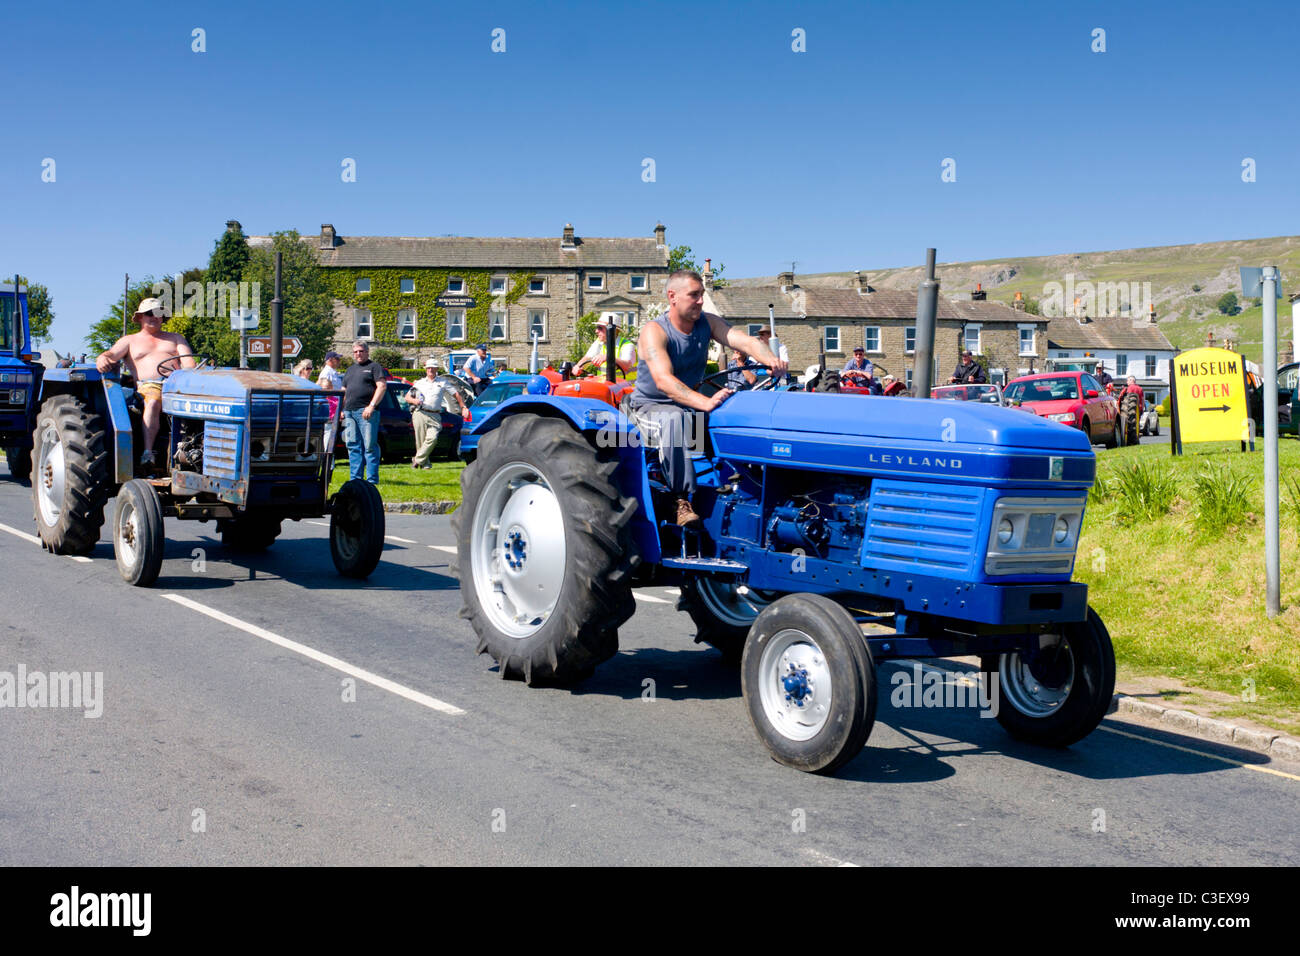 Layland 334 Vintage Tractor in Reeth Yorkshire Dales UK Stock Photo